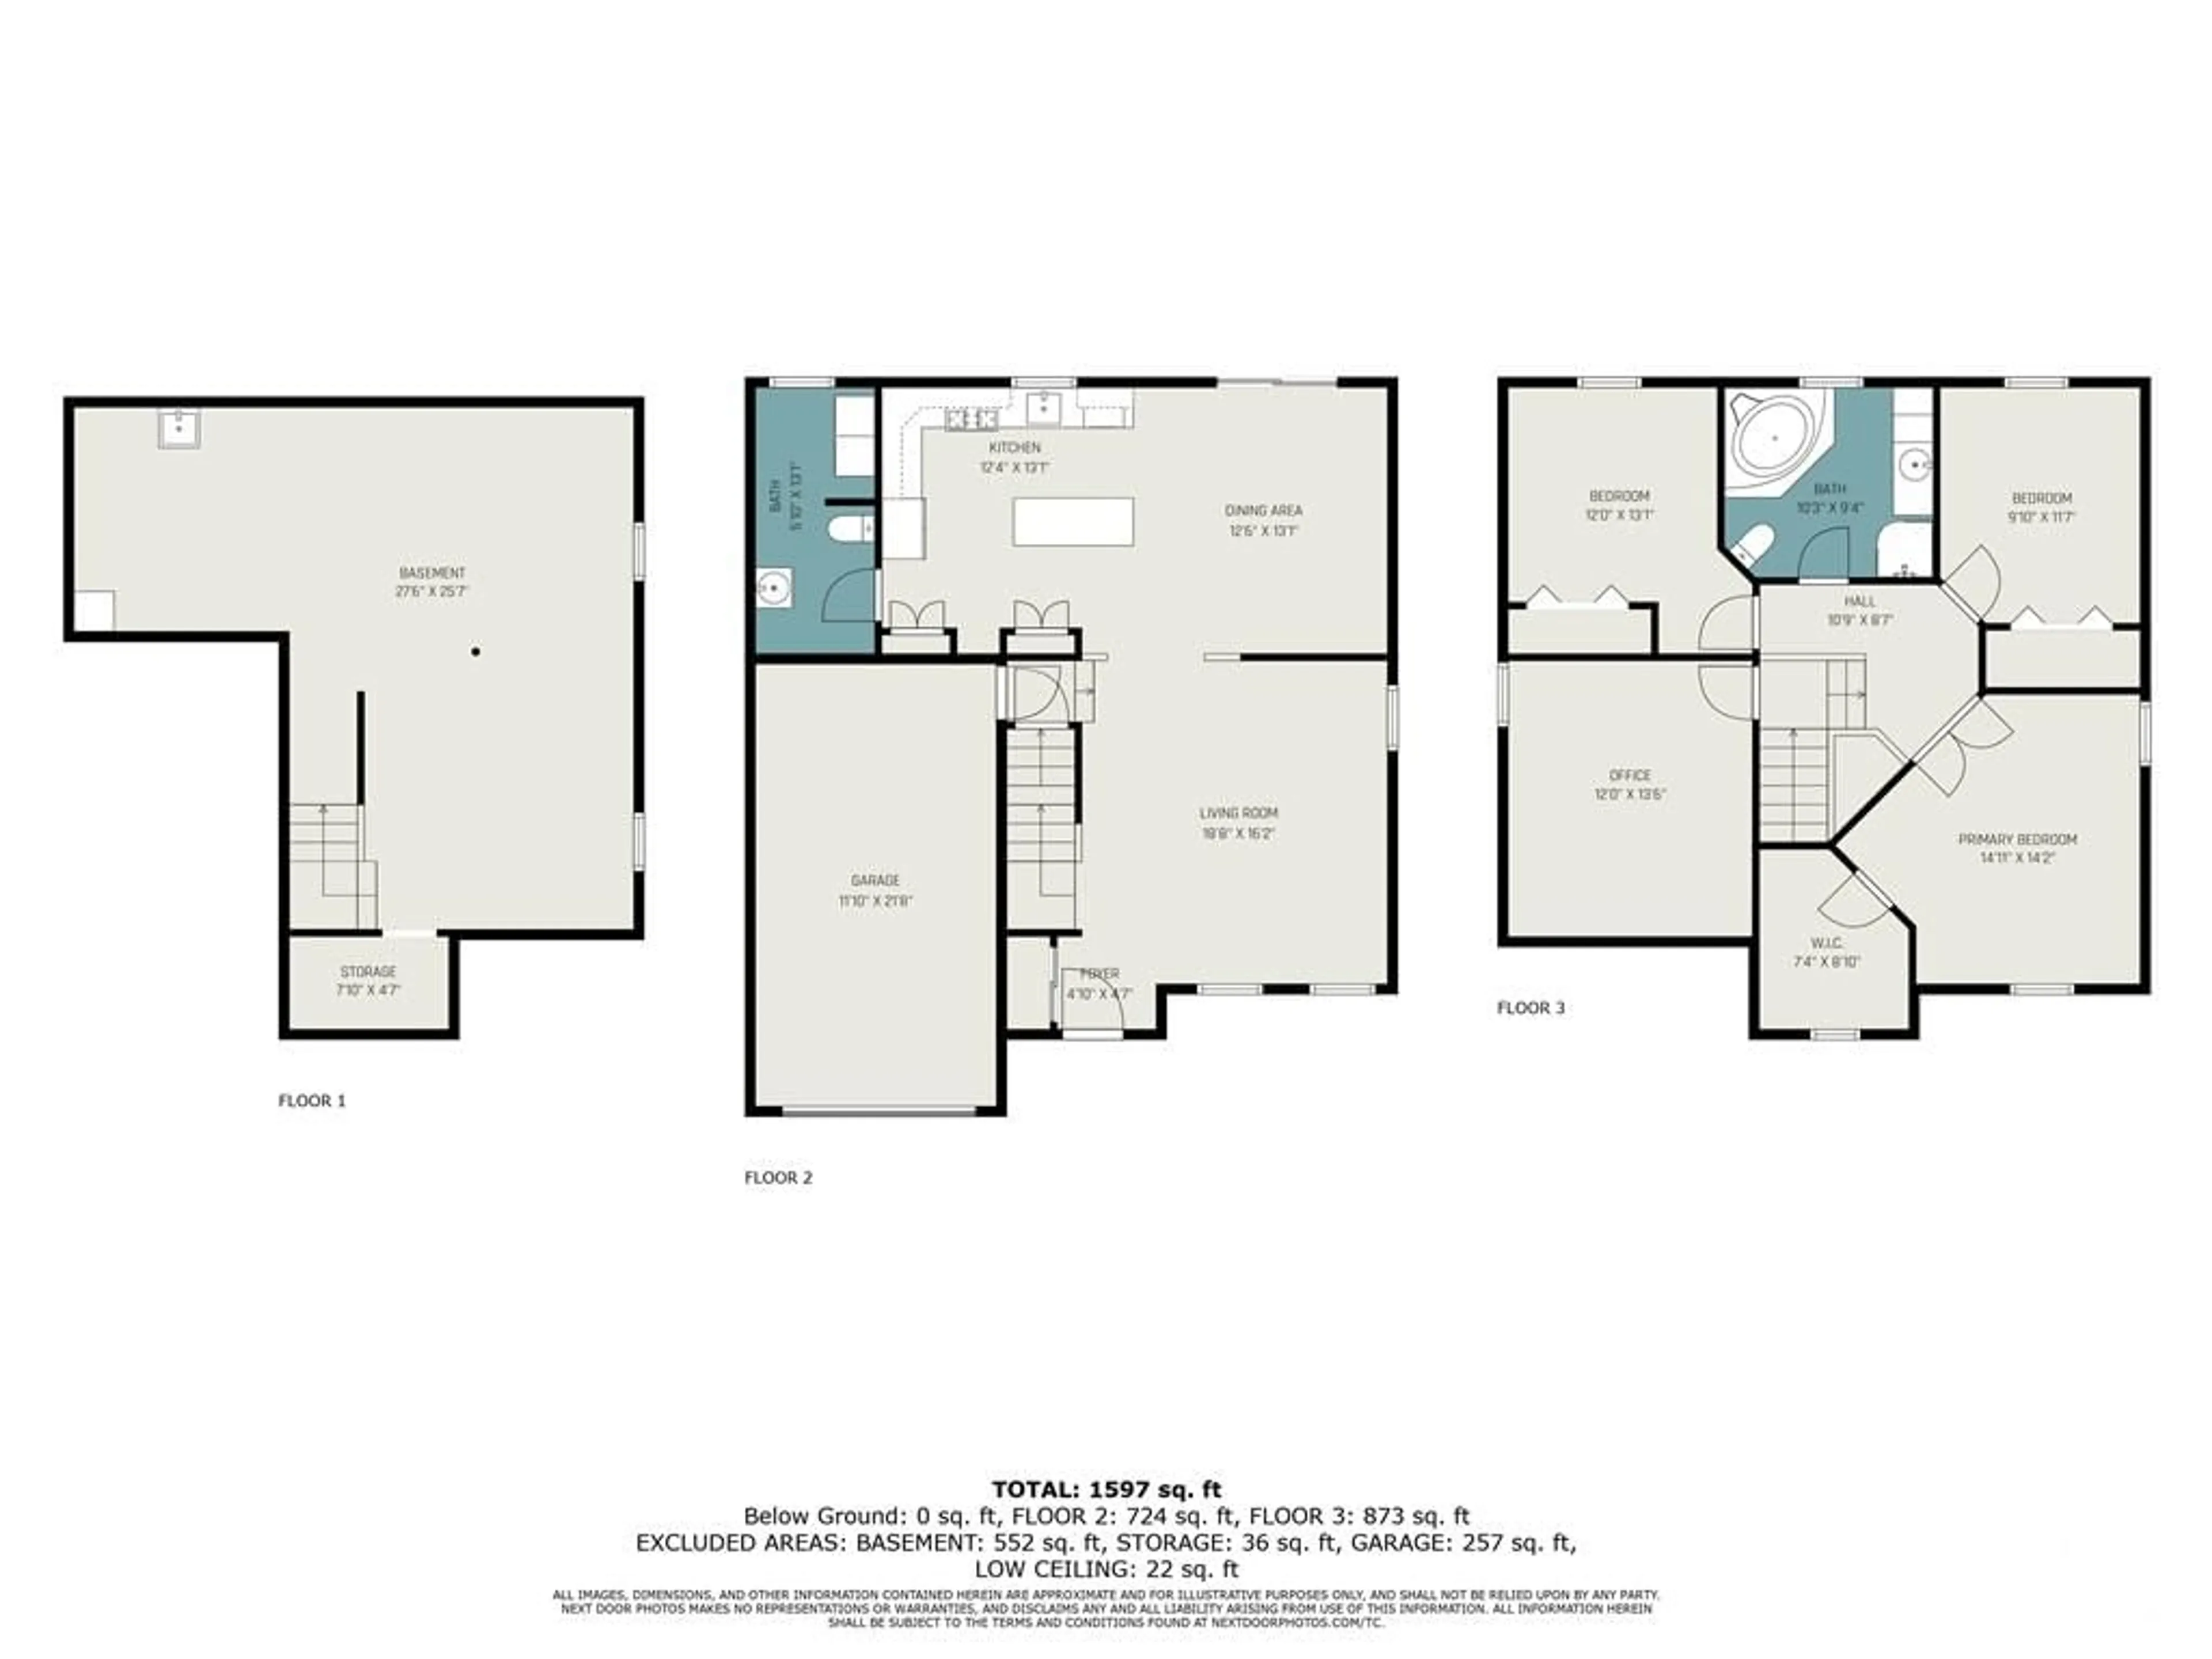 Floor plan for 5 PROVOST St, Crysler Ontario K0A 1R0